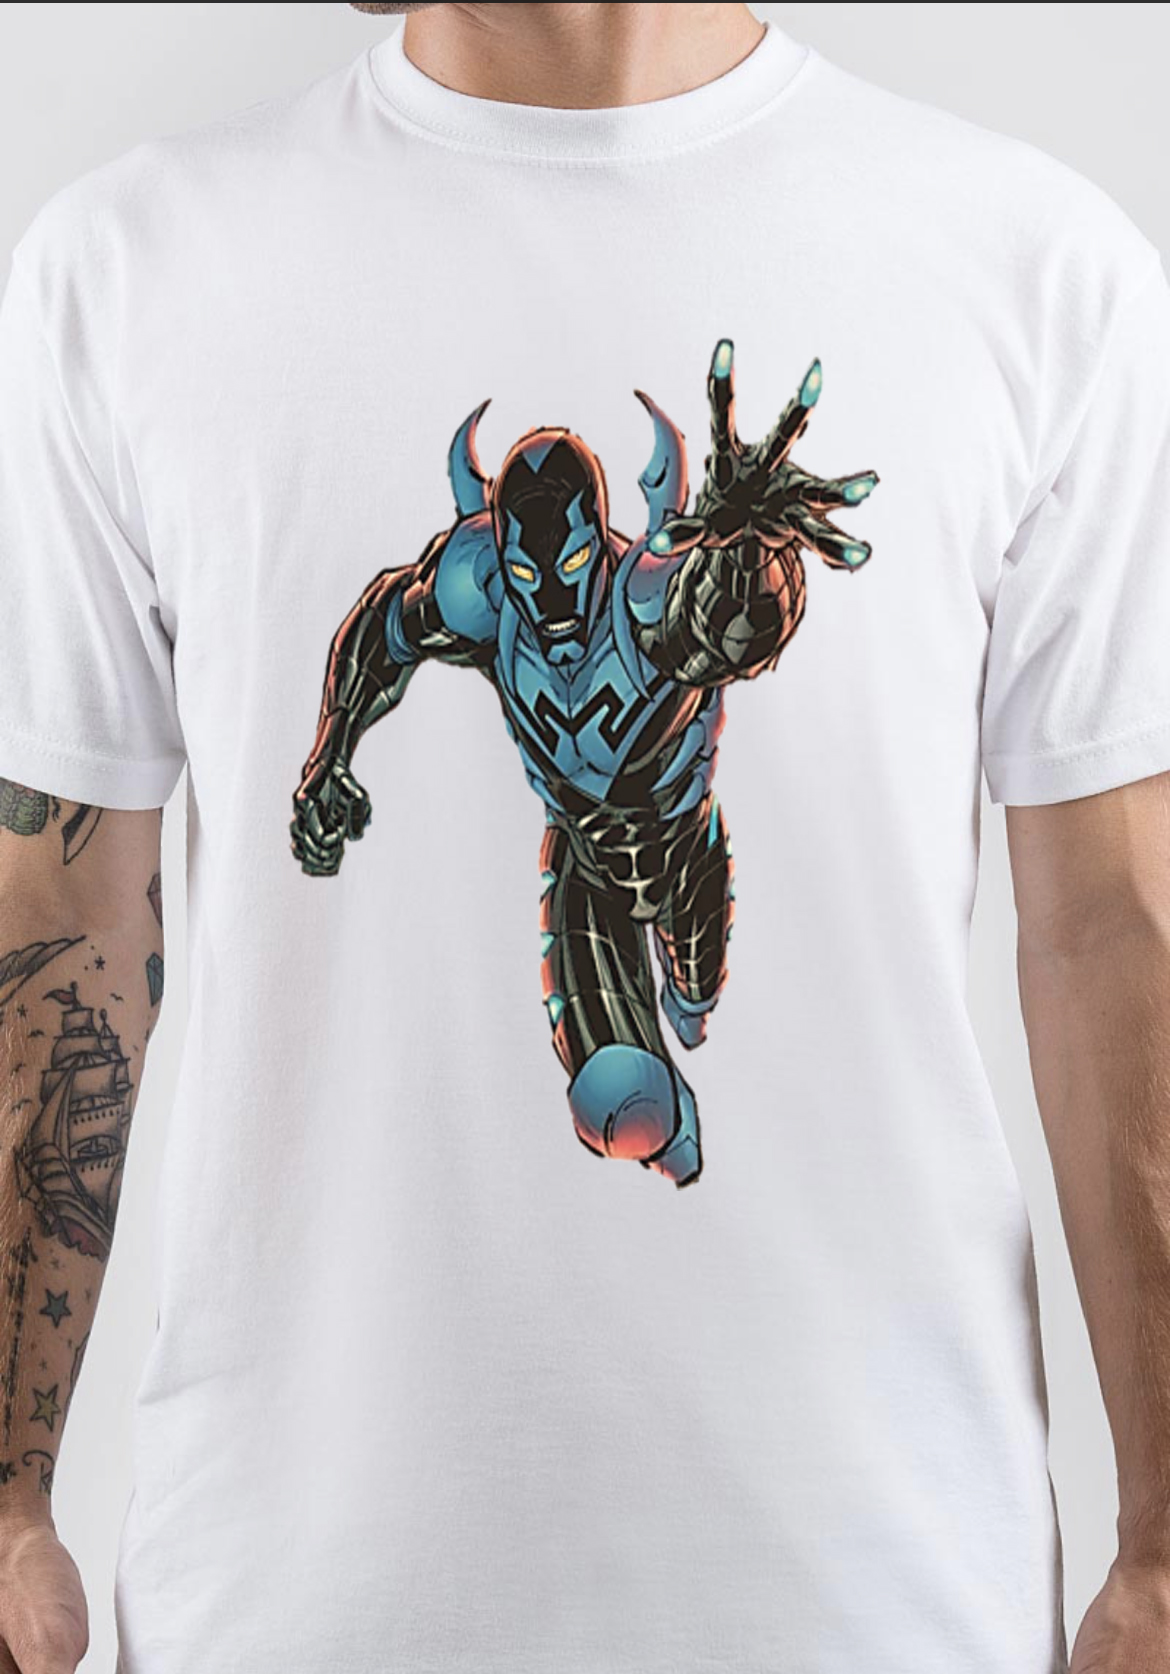 Blue Beetle T-Shirt And Merchandise